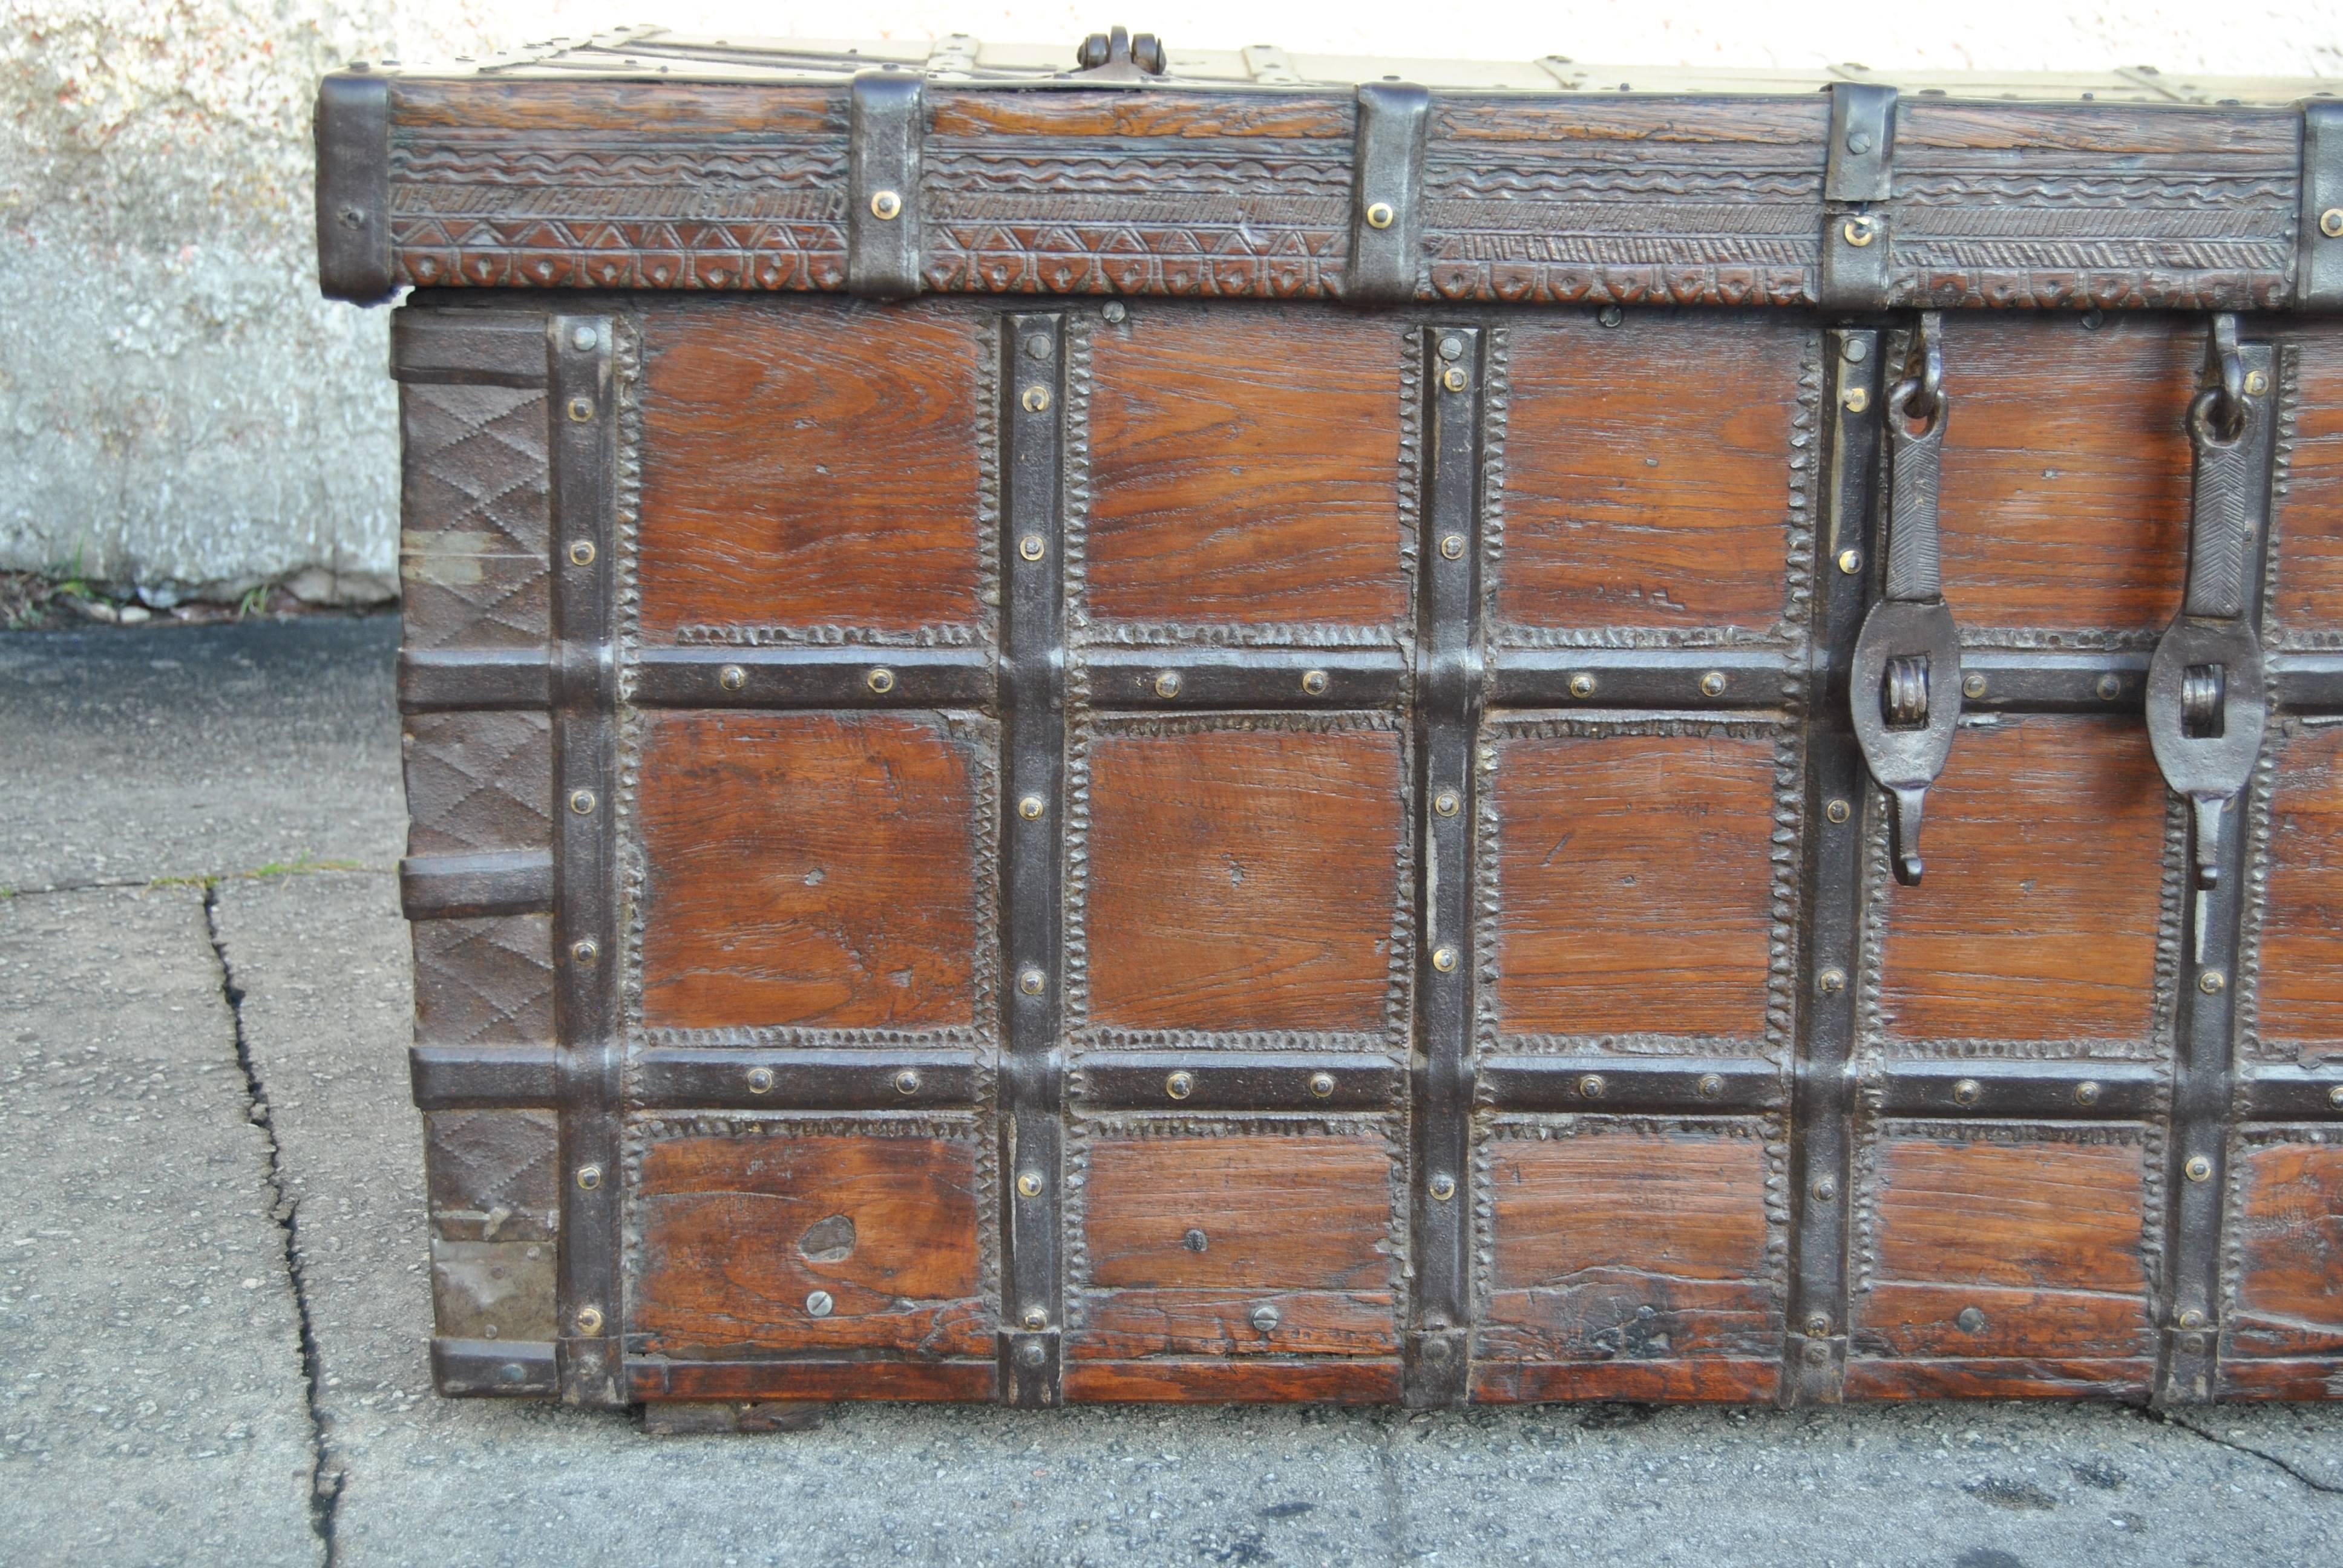 This is a blanket chest from India, made circa 1780. All the metal strapping, handles and lock clasps are handmade of hand-forged iron. There is beautiful hand carving around the bottom edge of the top of the chest. On the right and left front sides